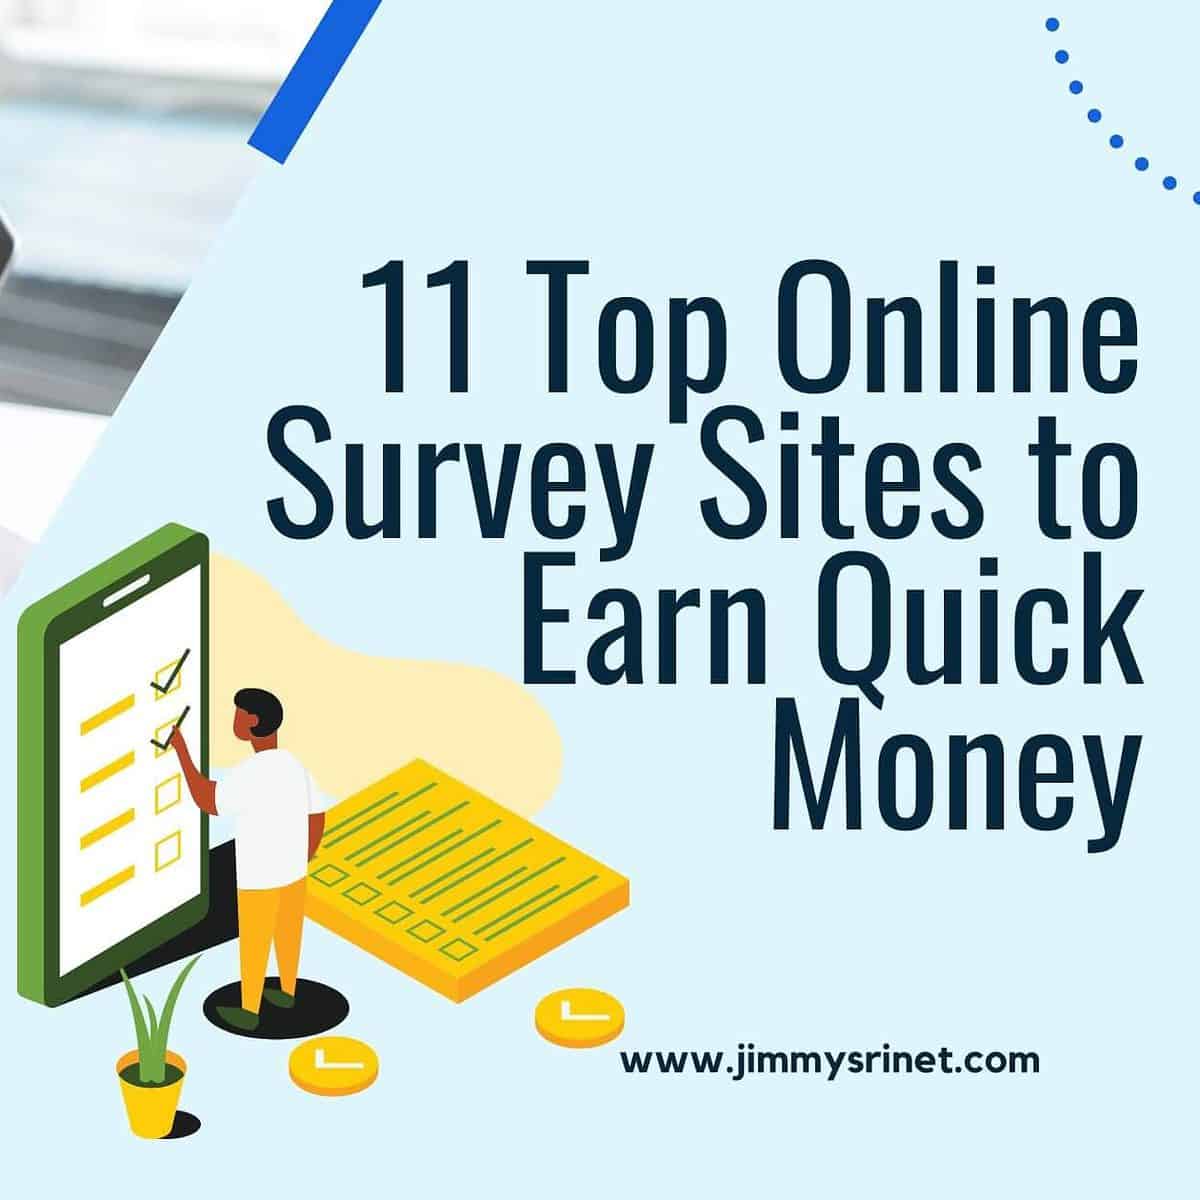 You are currently viewing Top 11 Online Survey Sites for Quick Money: Google Surveys, Swagbucks, LifePoints, and More